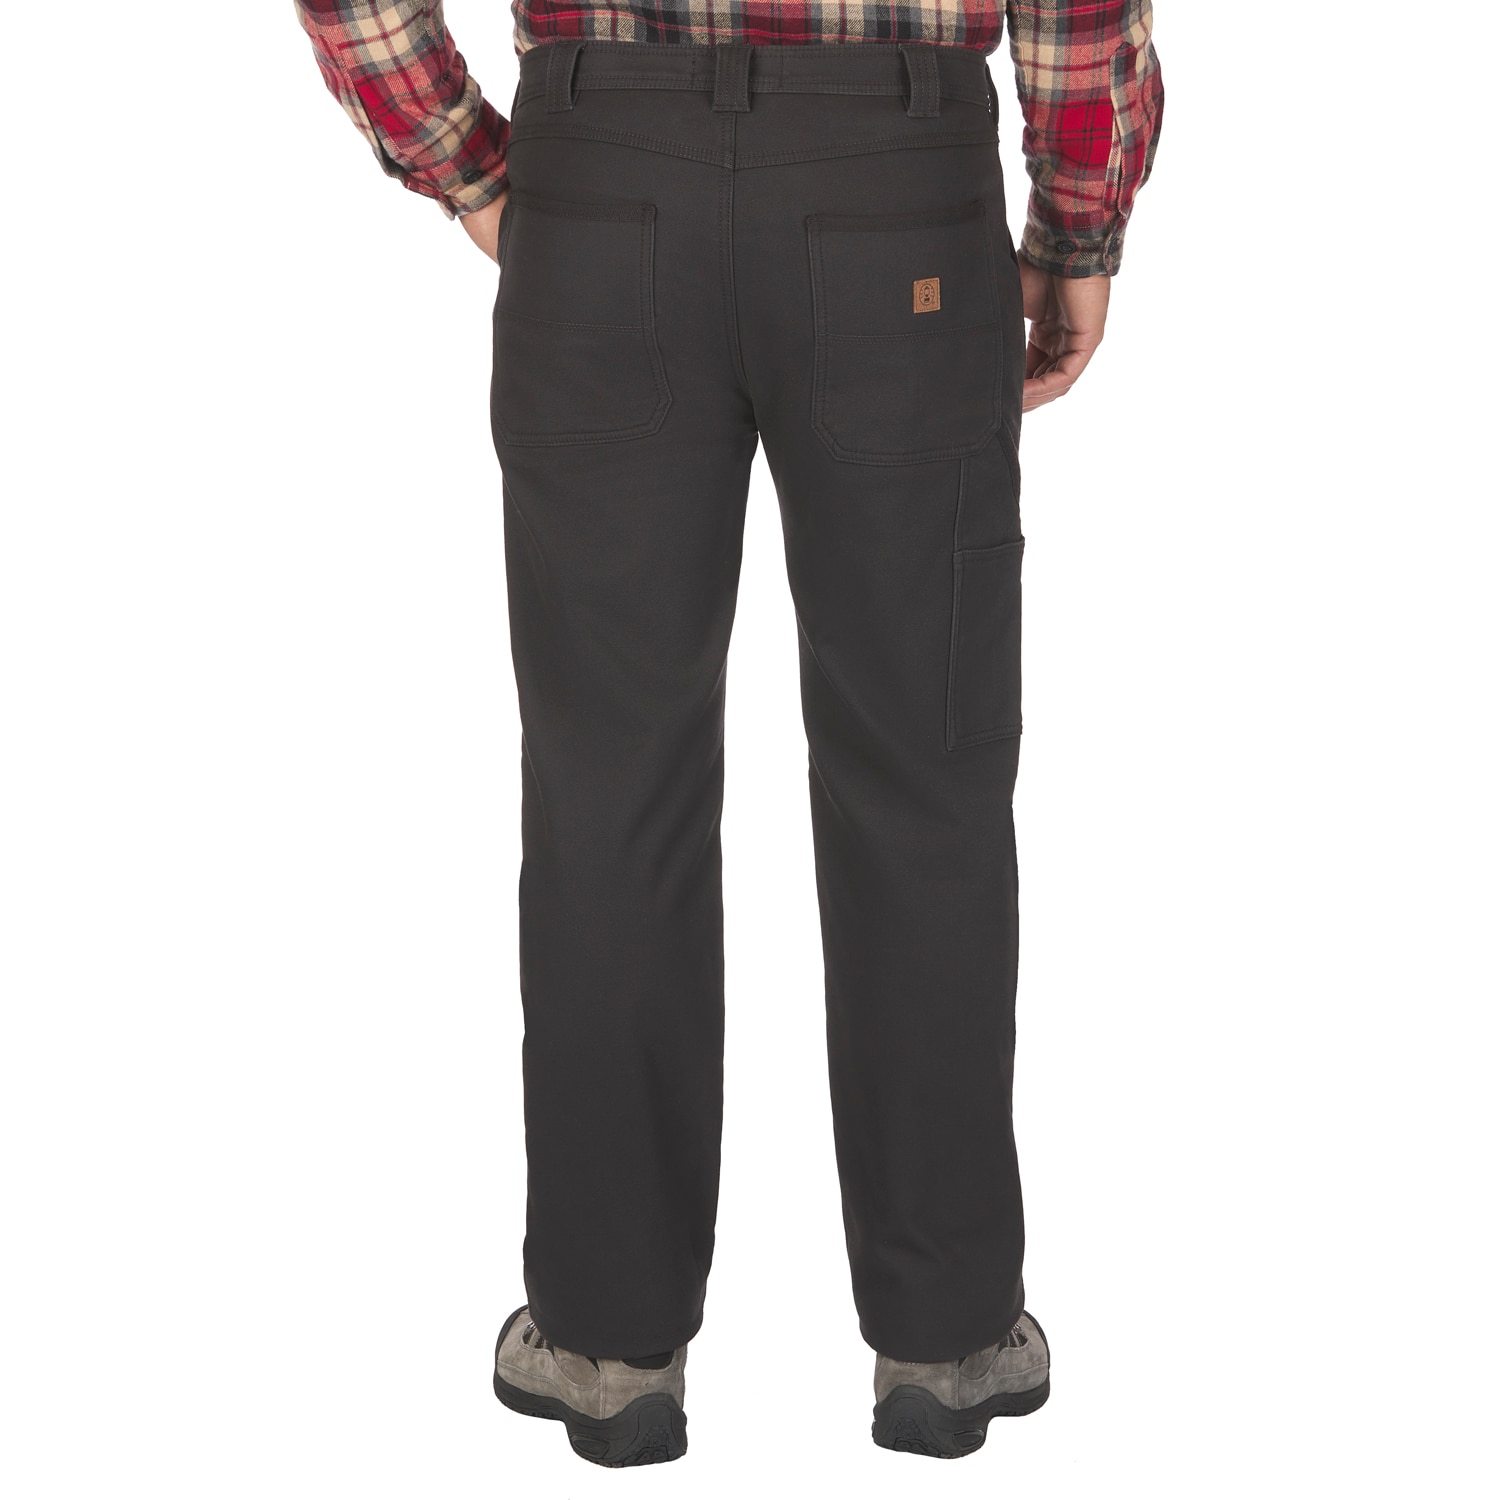  Coleman Bonded Fleece Lined Pant (Driftwood, 32/30) : Clothing,  Shoes & Jewelry